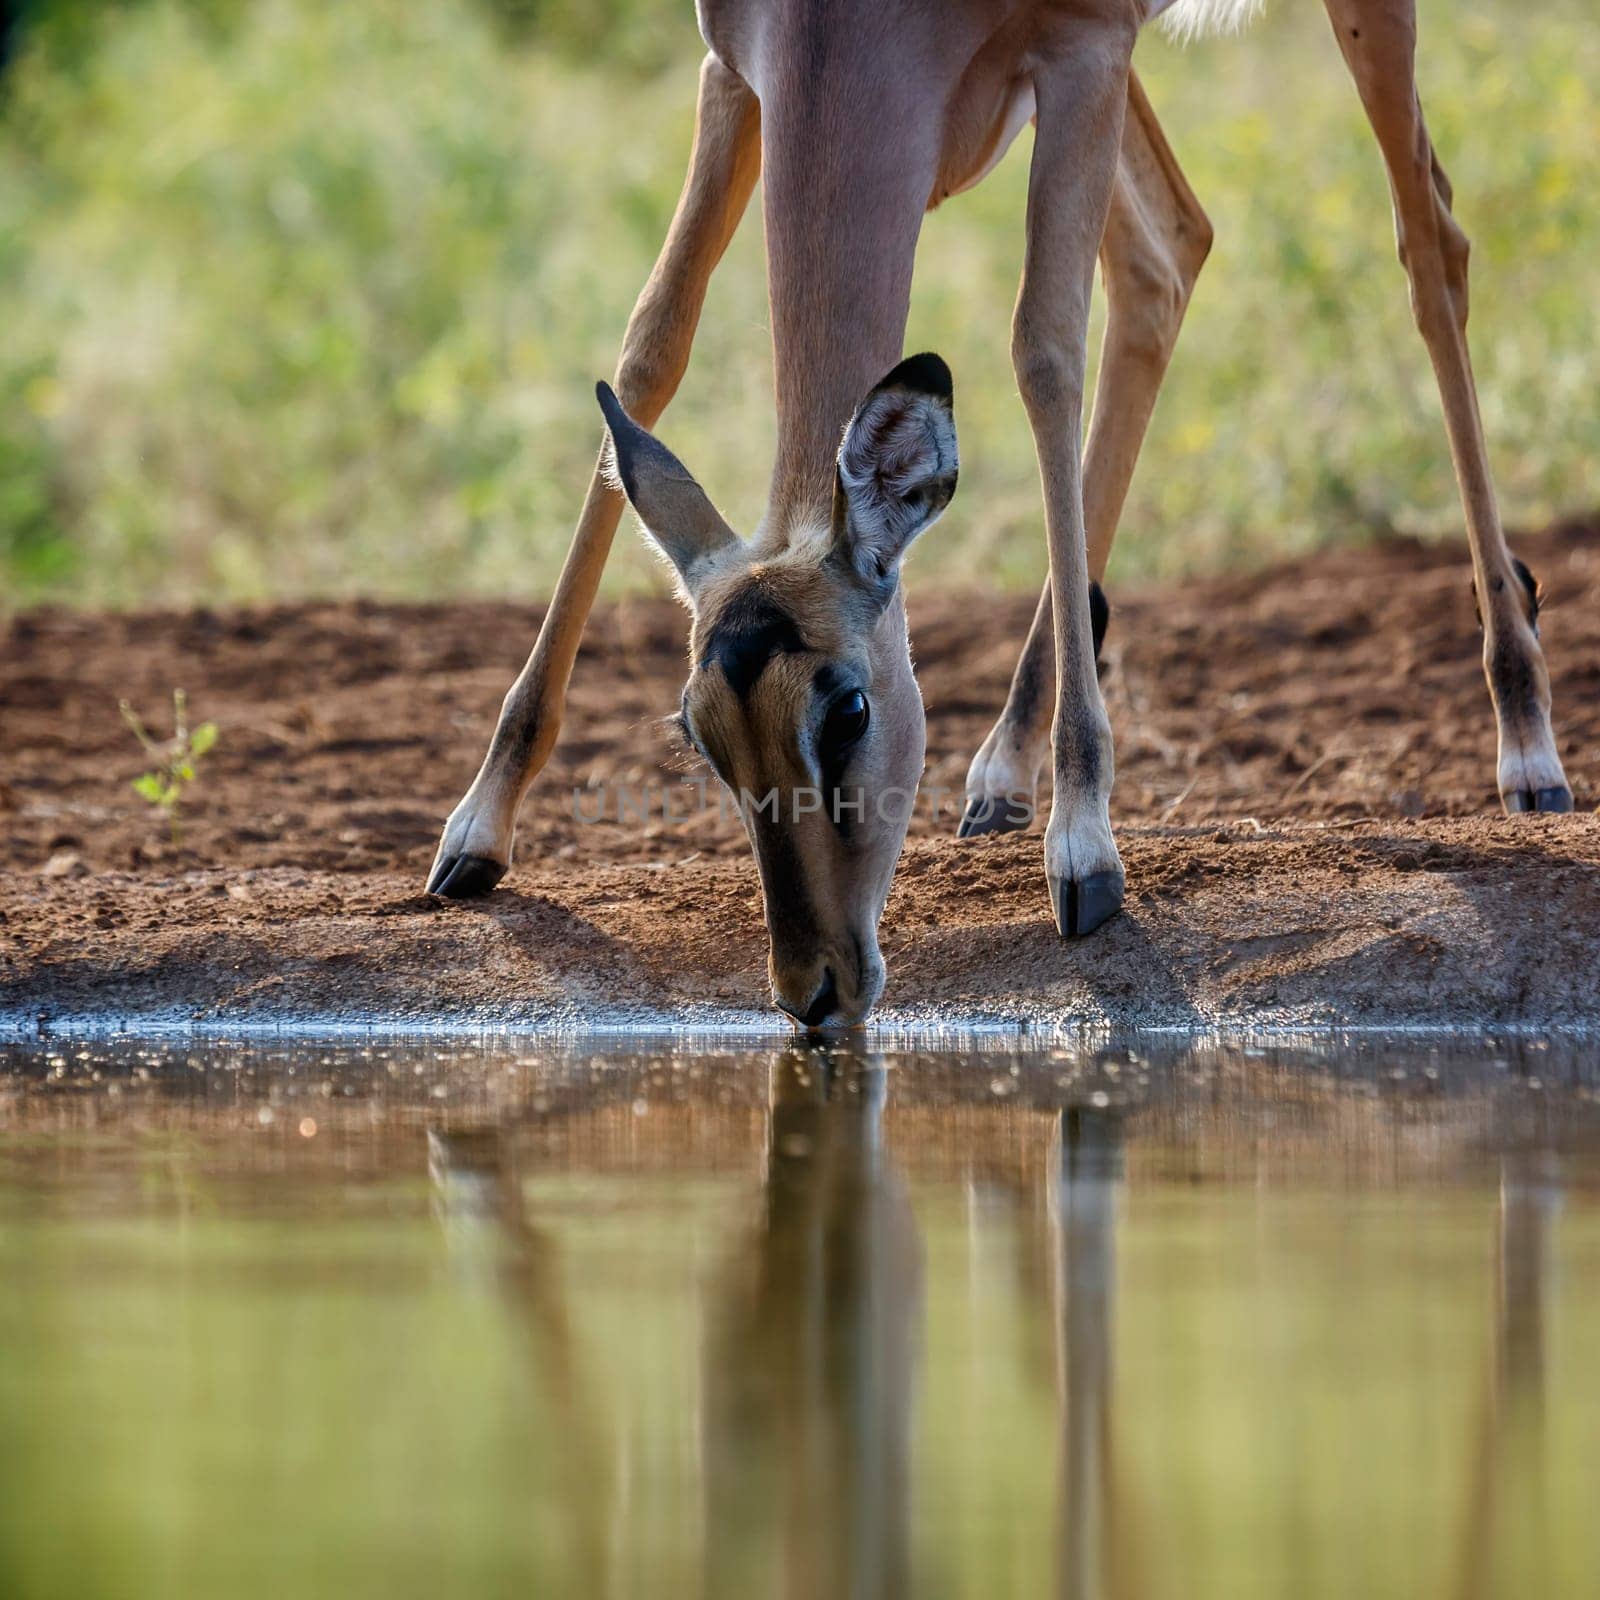 Common Impala female portrait drinking in waterhole in Kruger National park, South Africa ; Specie Aepyceros melampus family of Bovidae